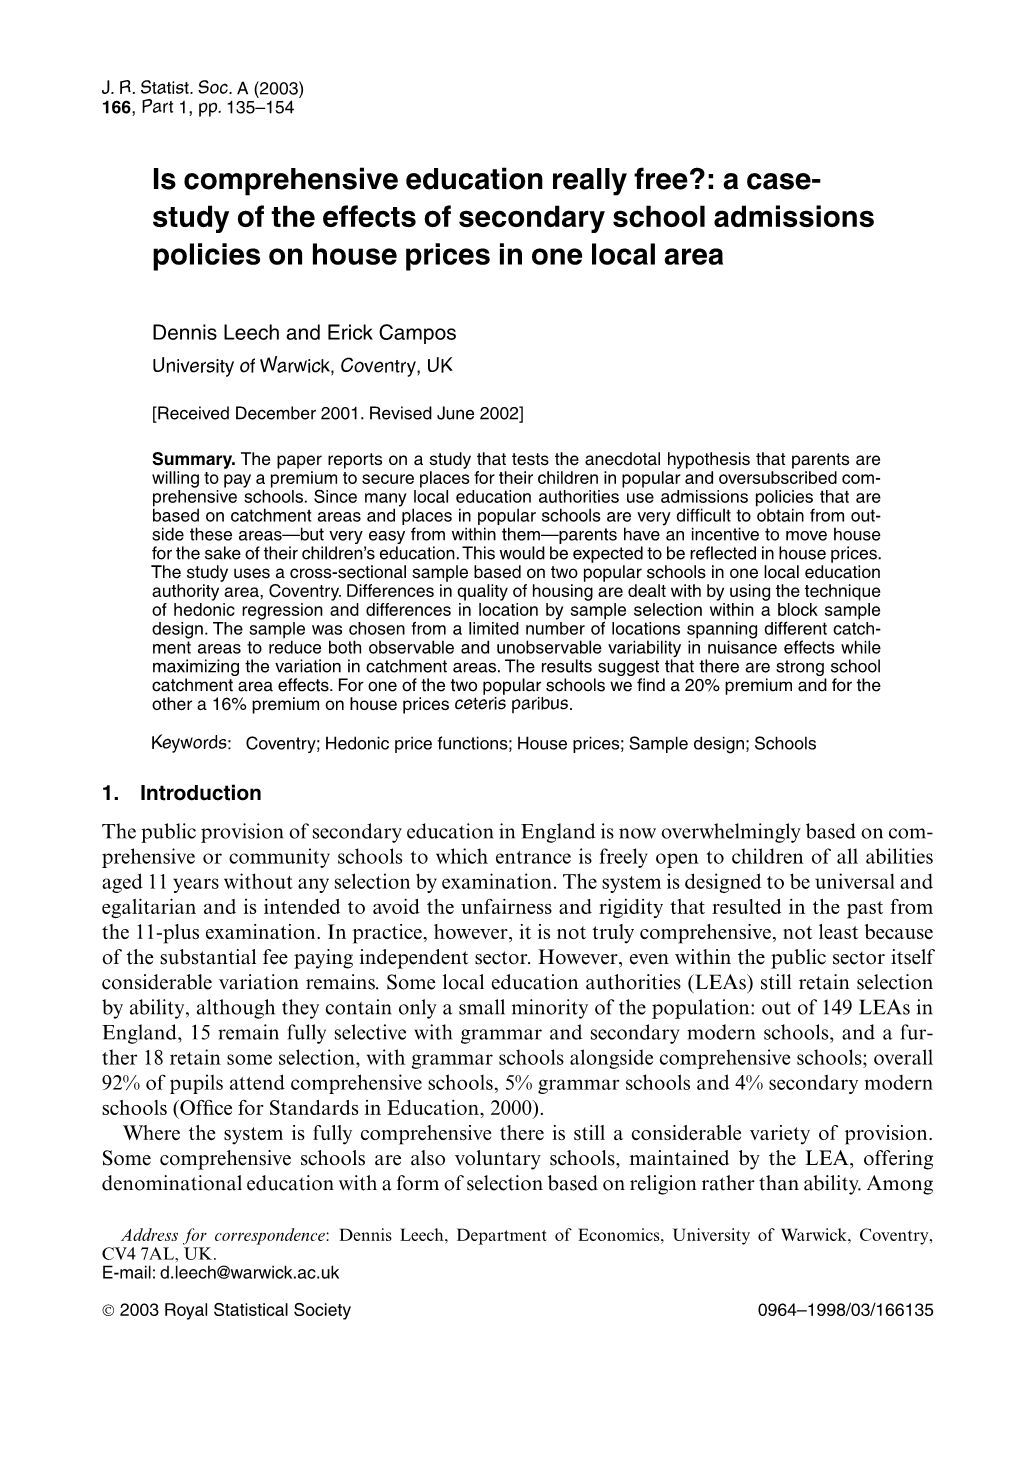 Study of the Effects of Secondary School Admissions Policies on House Prices in One Local Area